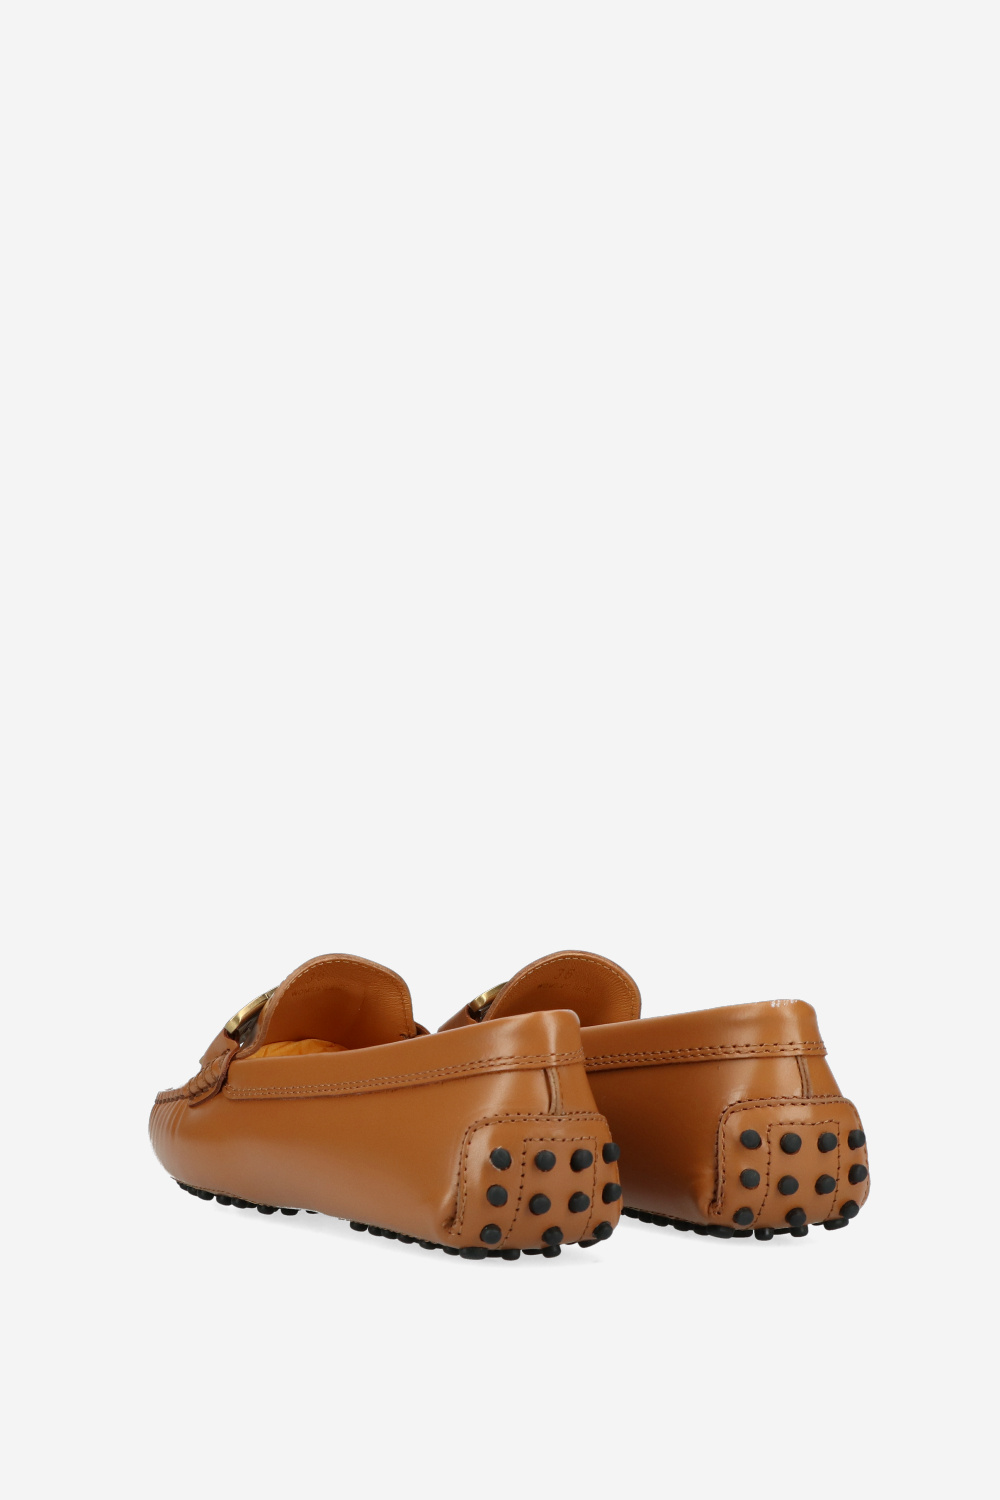 Tods Loafers Camel